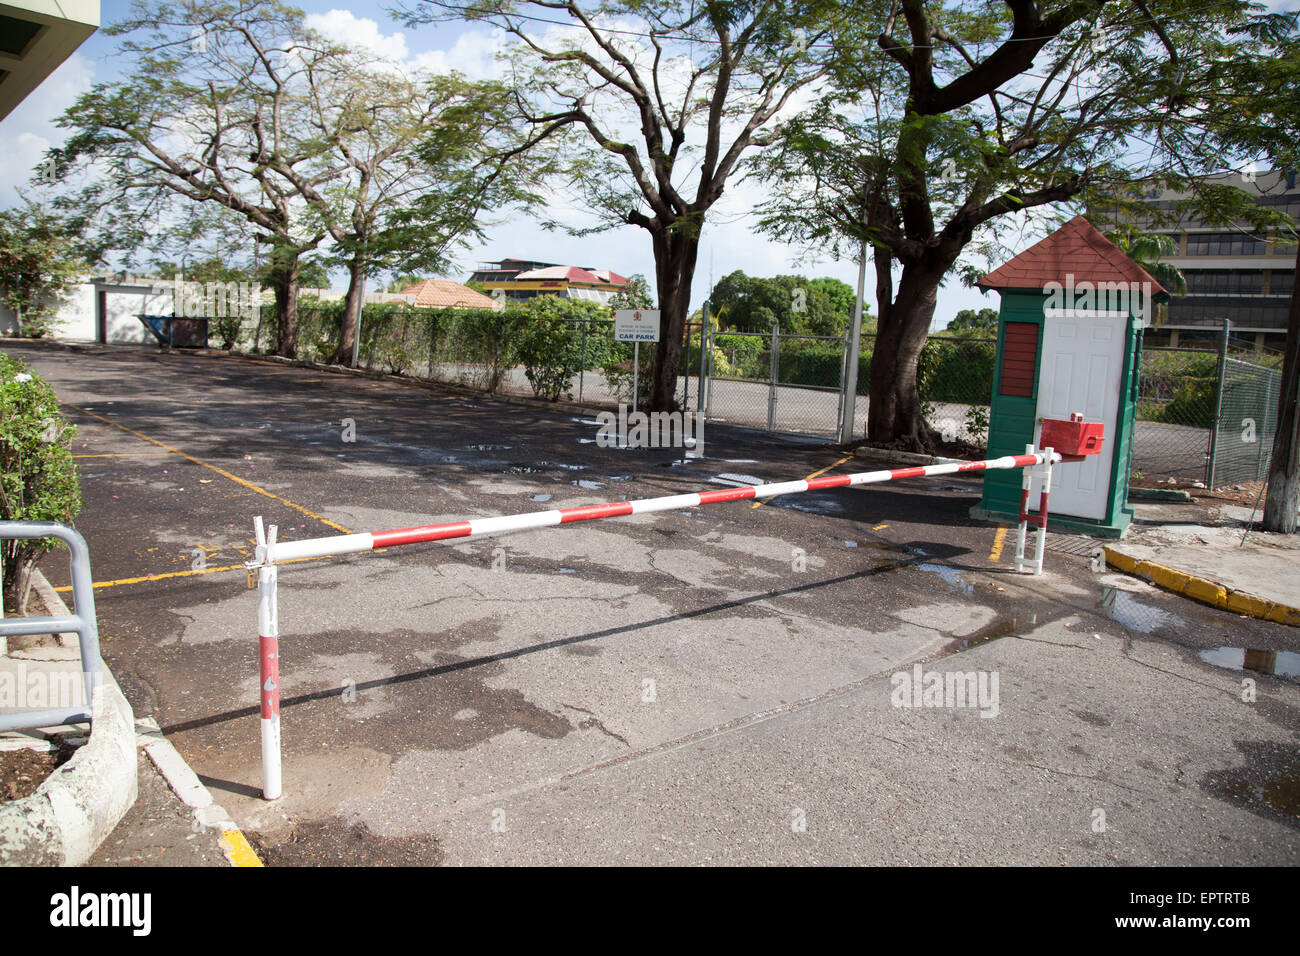 Security barrier on the road, Jamaica Stock Photo